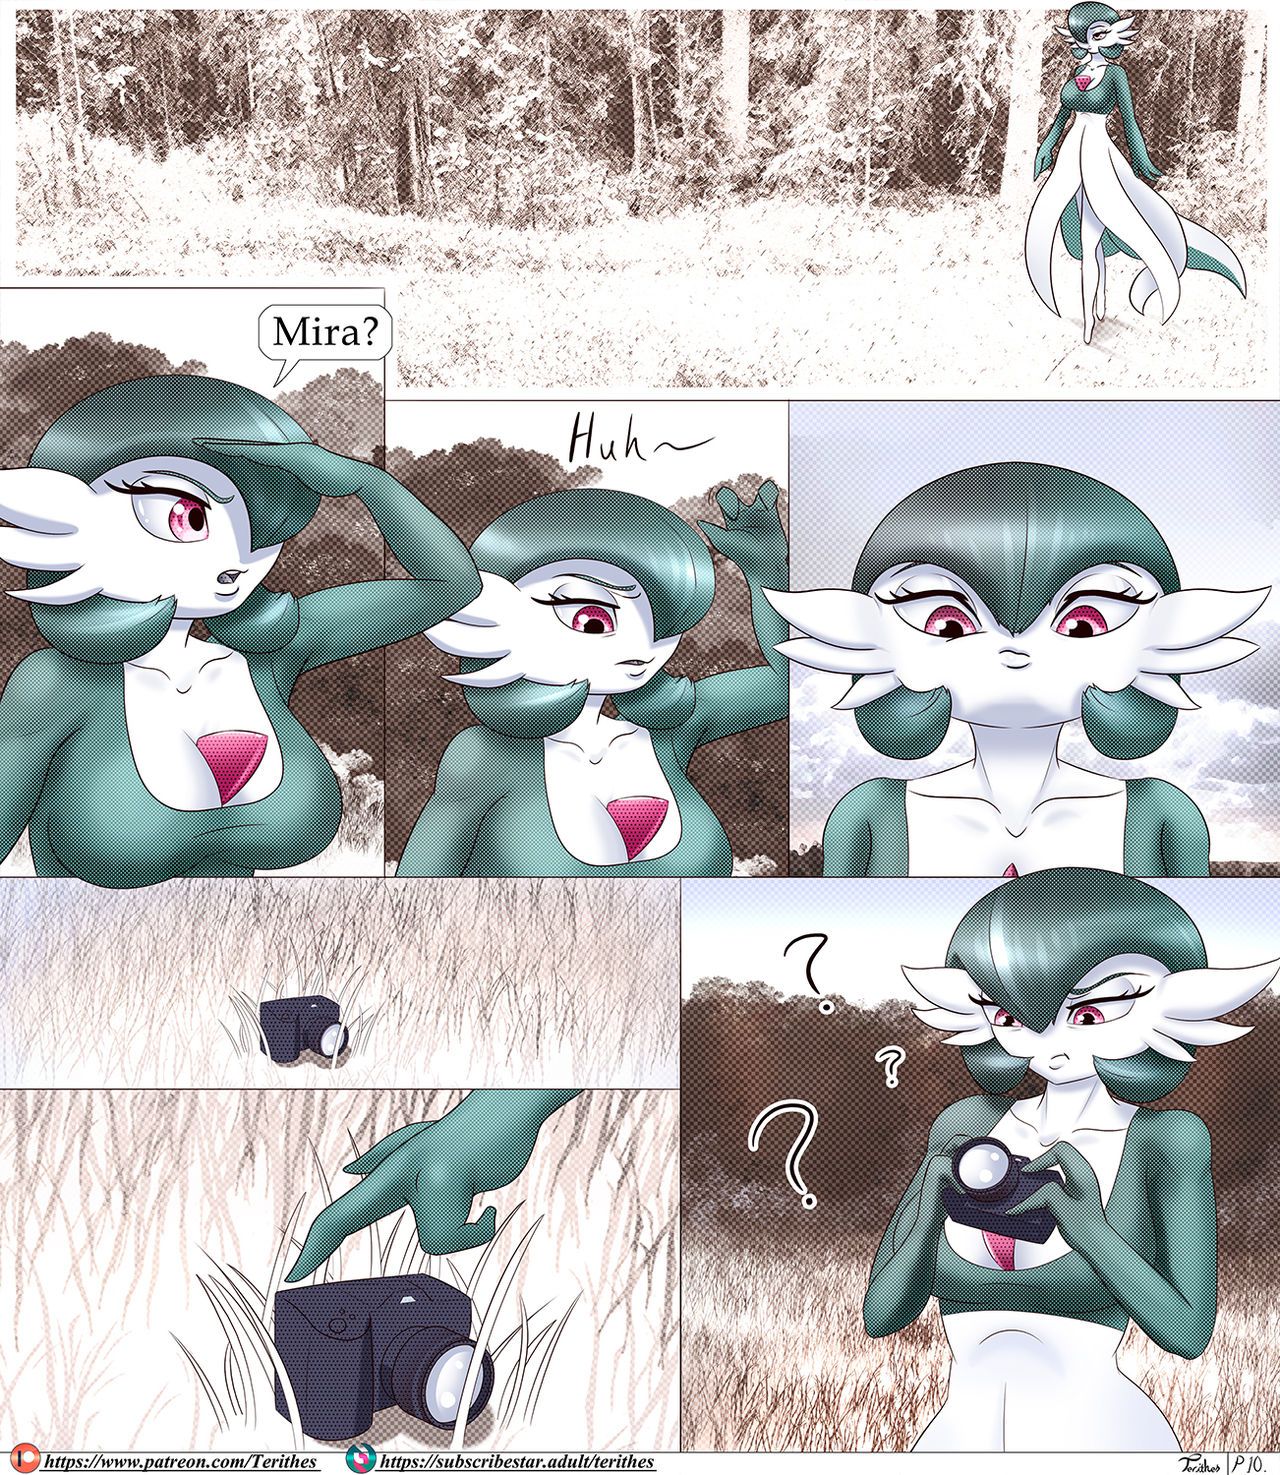 [Terithes] Pokemon Fun in the Wilds [Ongoing] 12